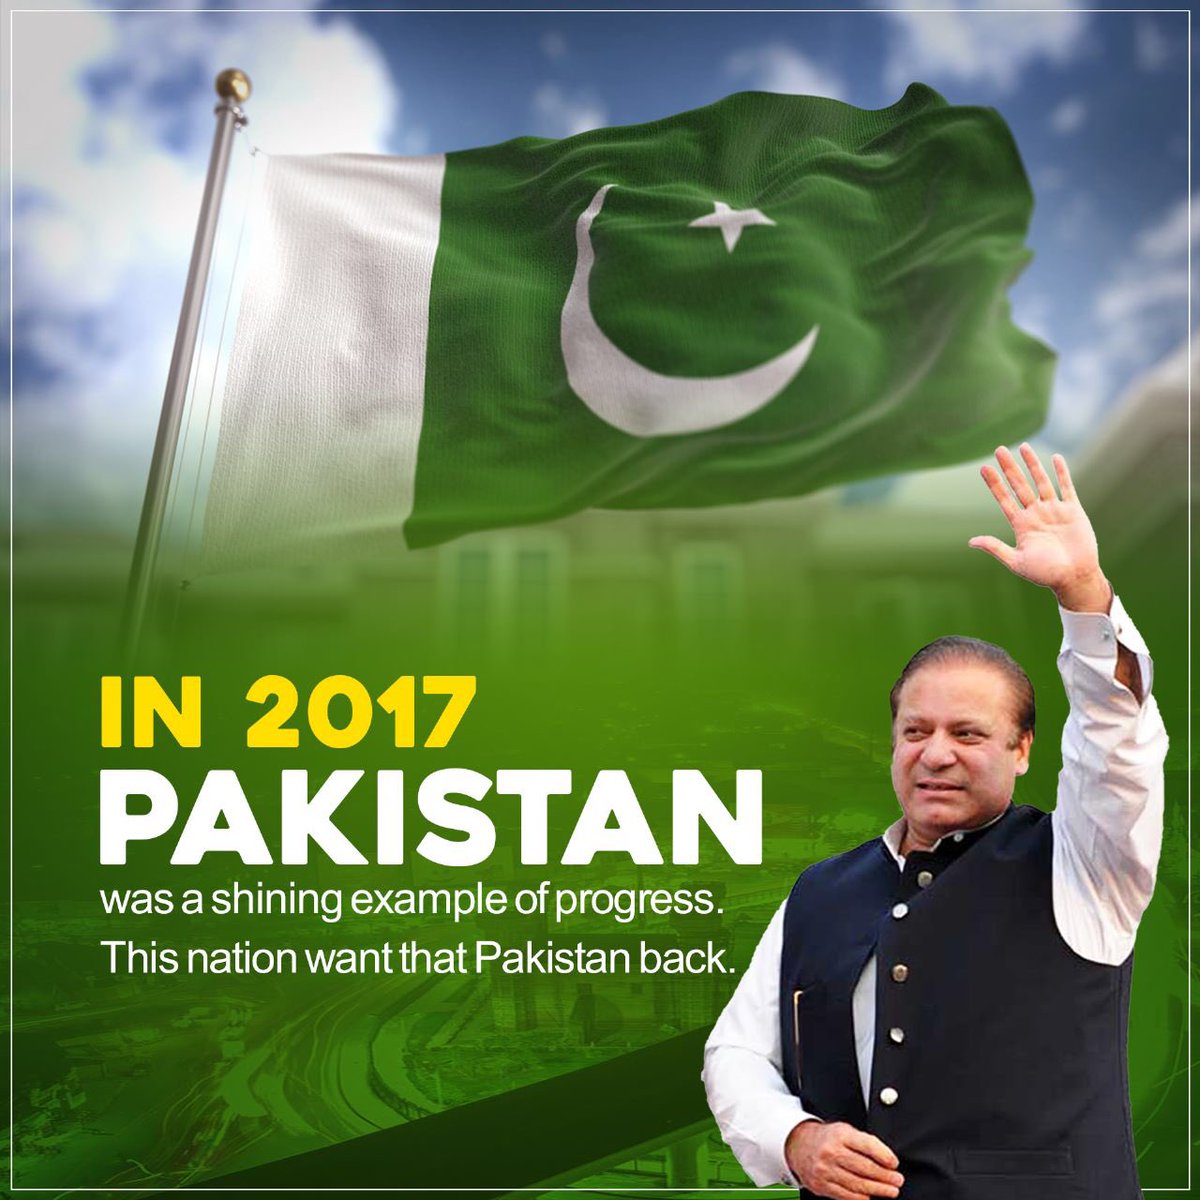 Results speak louder than words, and PML-N delivers on its promises! From infrastructure development to social welfare programs, PMLN has a proven record of making a difference. #میں_ن_کا_ووٹر_کیوں